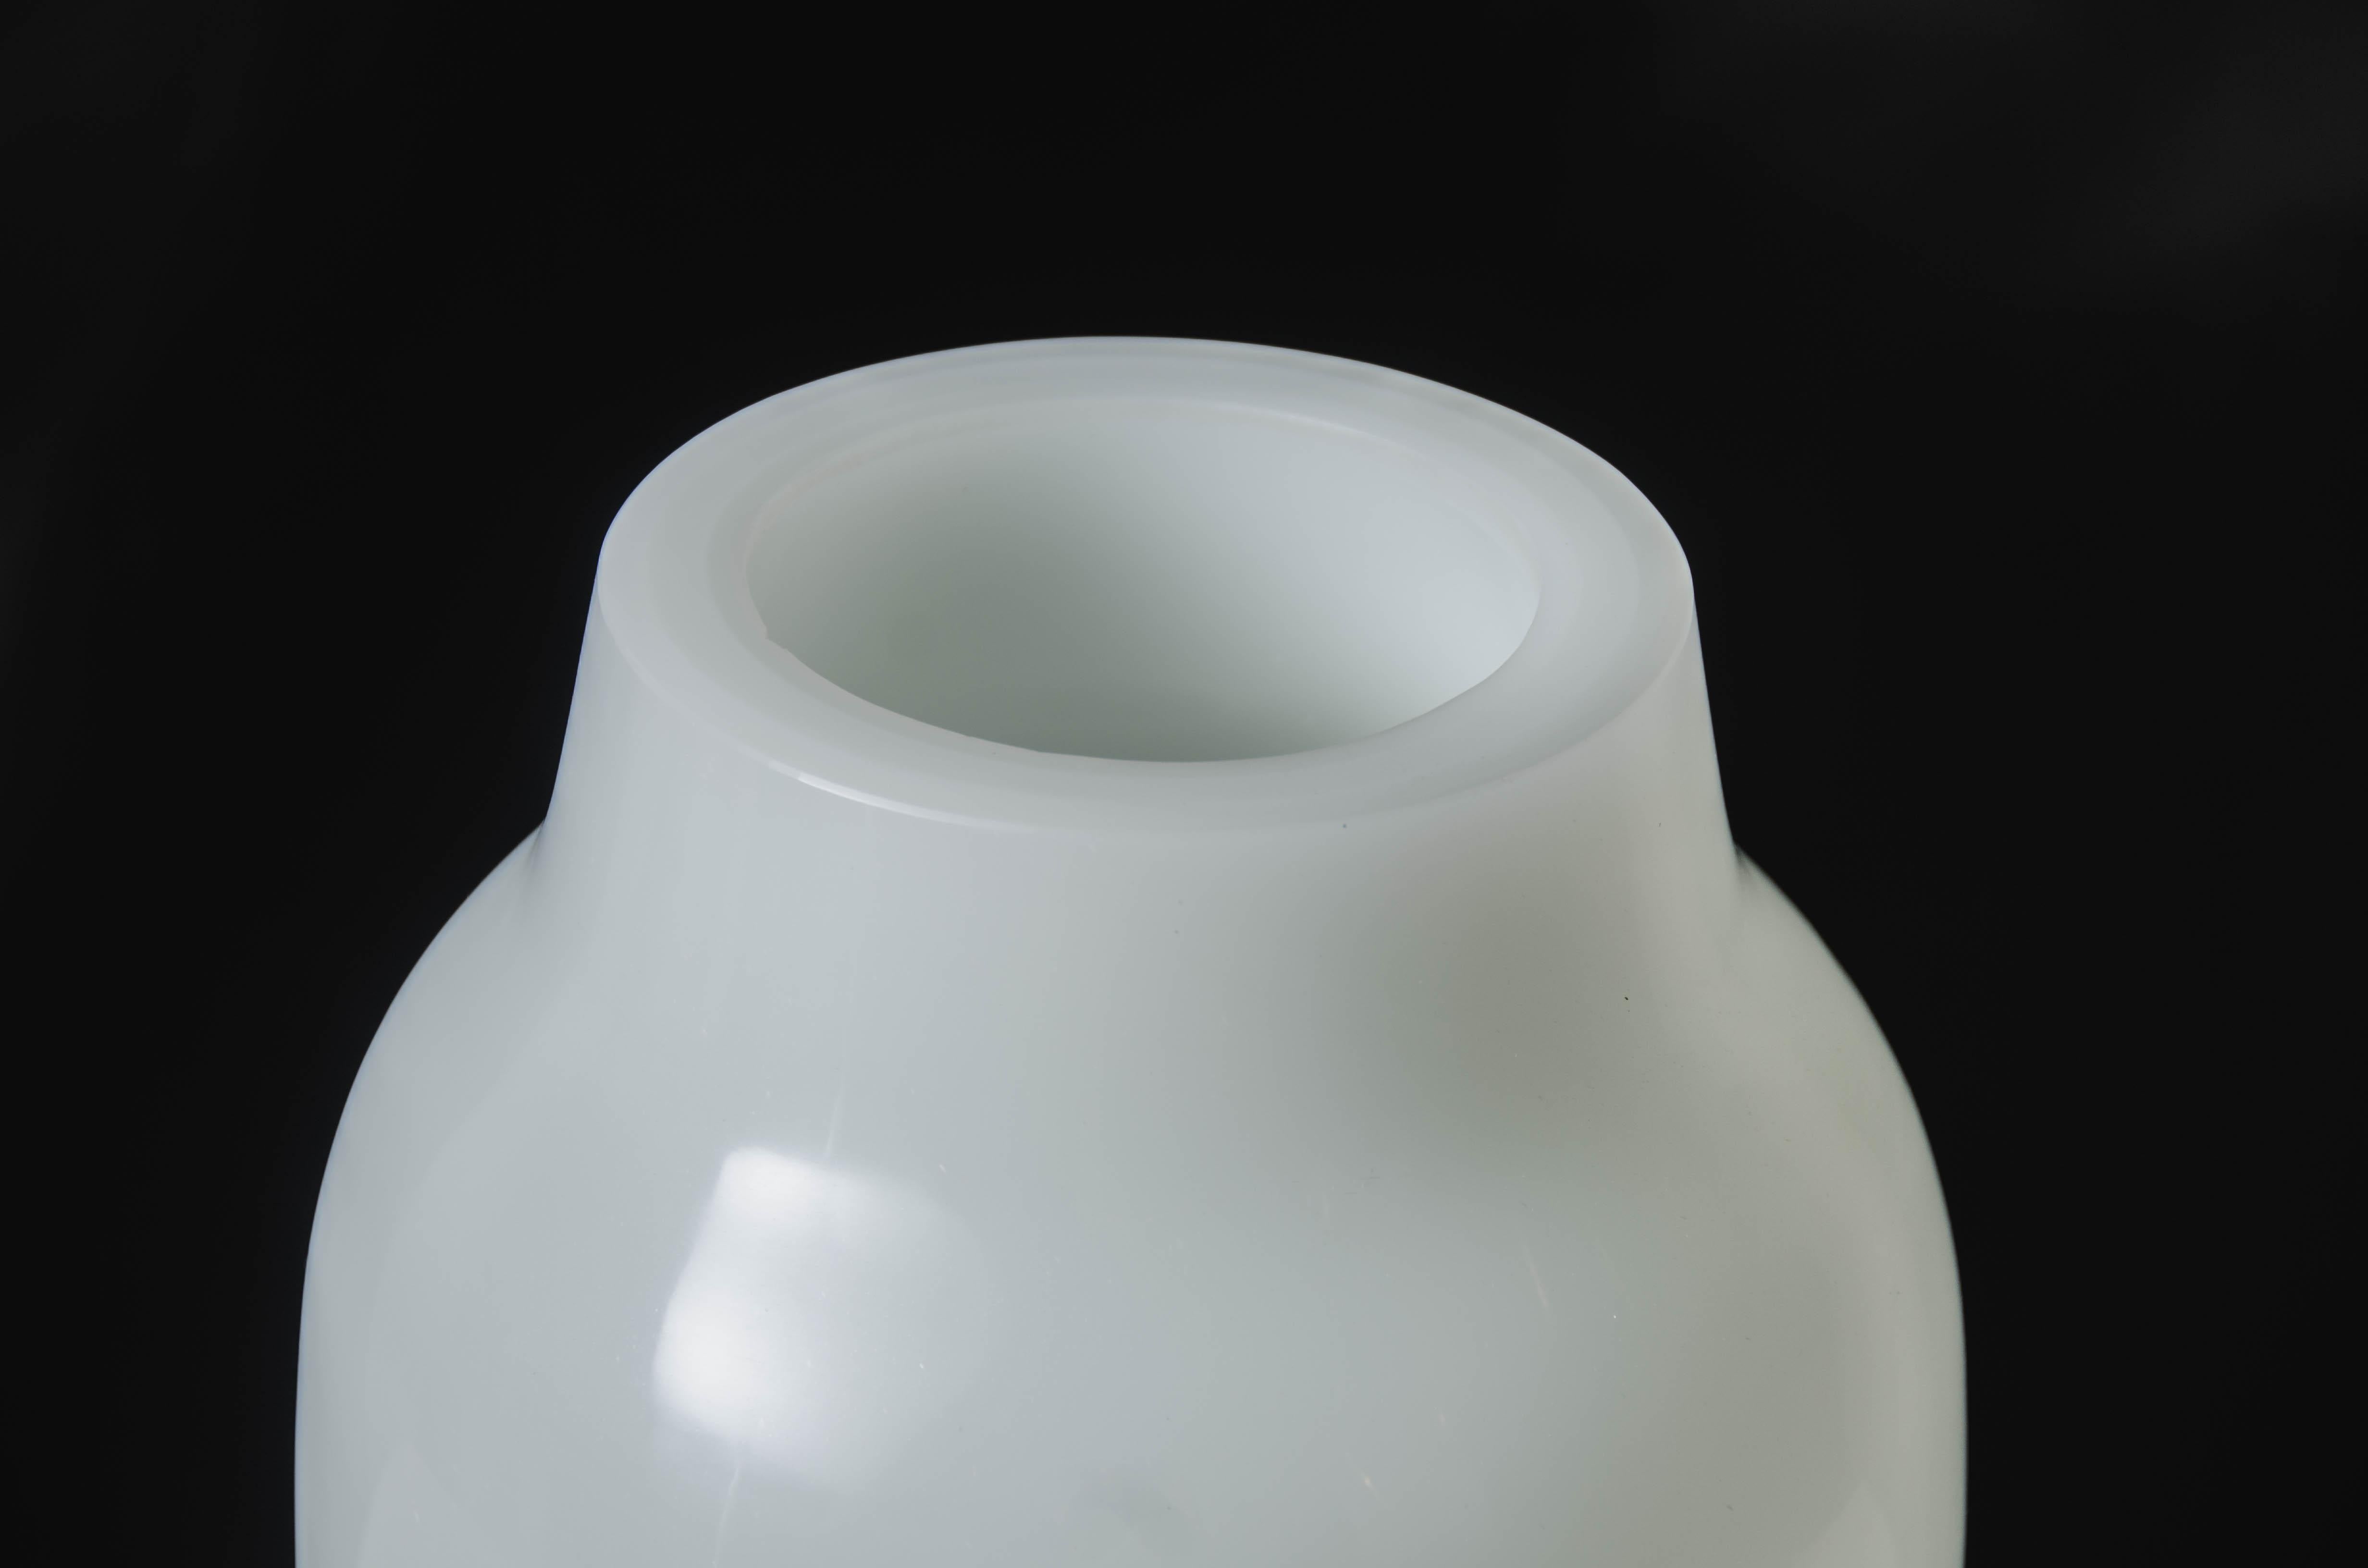 Urn Shape Vase
Bai Jade Peking Glass
Hand Blown Glass
Hand Carved

Peking glass refers to the high-quality glass art produced by the imperial and 
Commercial workshops in Beijing during the Ching Dynasty, China 1644-1911. Since then, ‘Peking